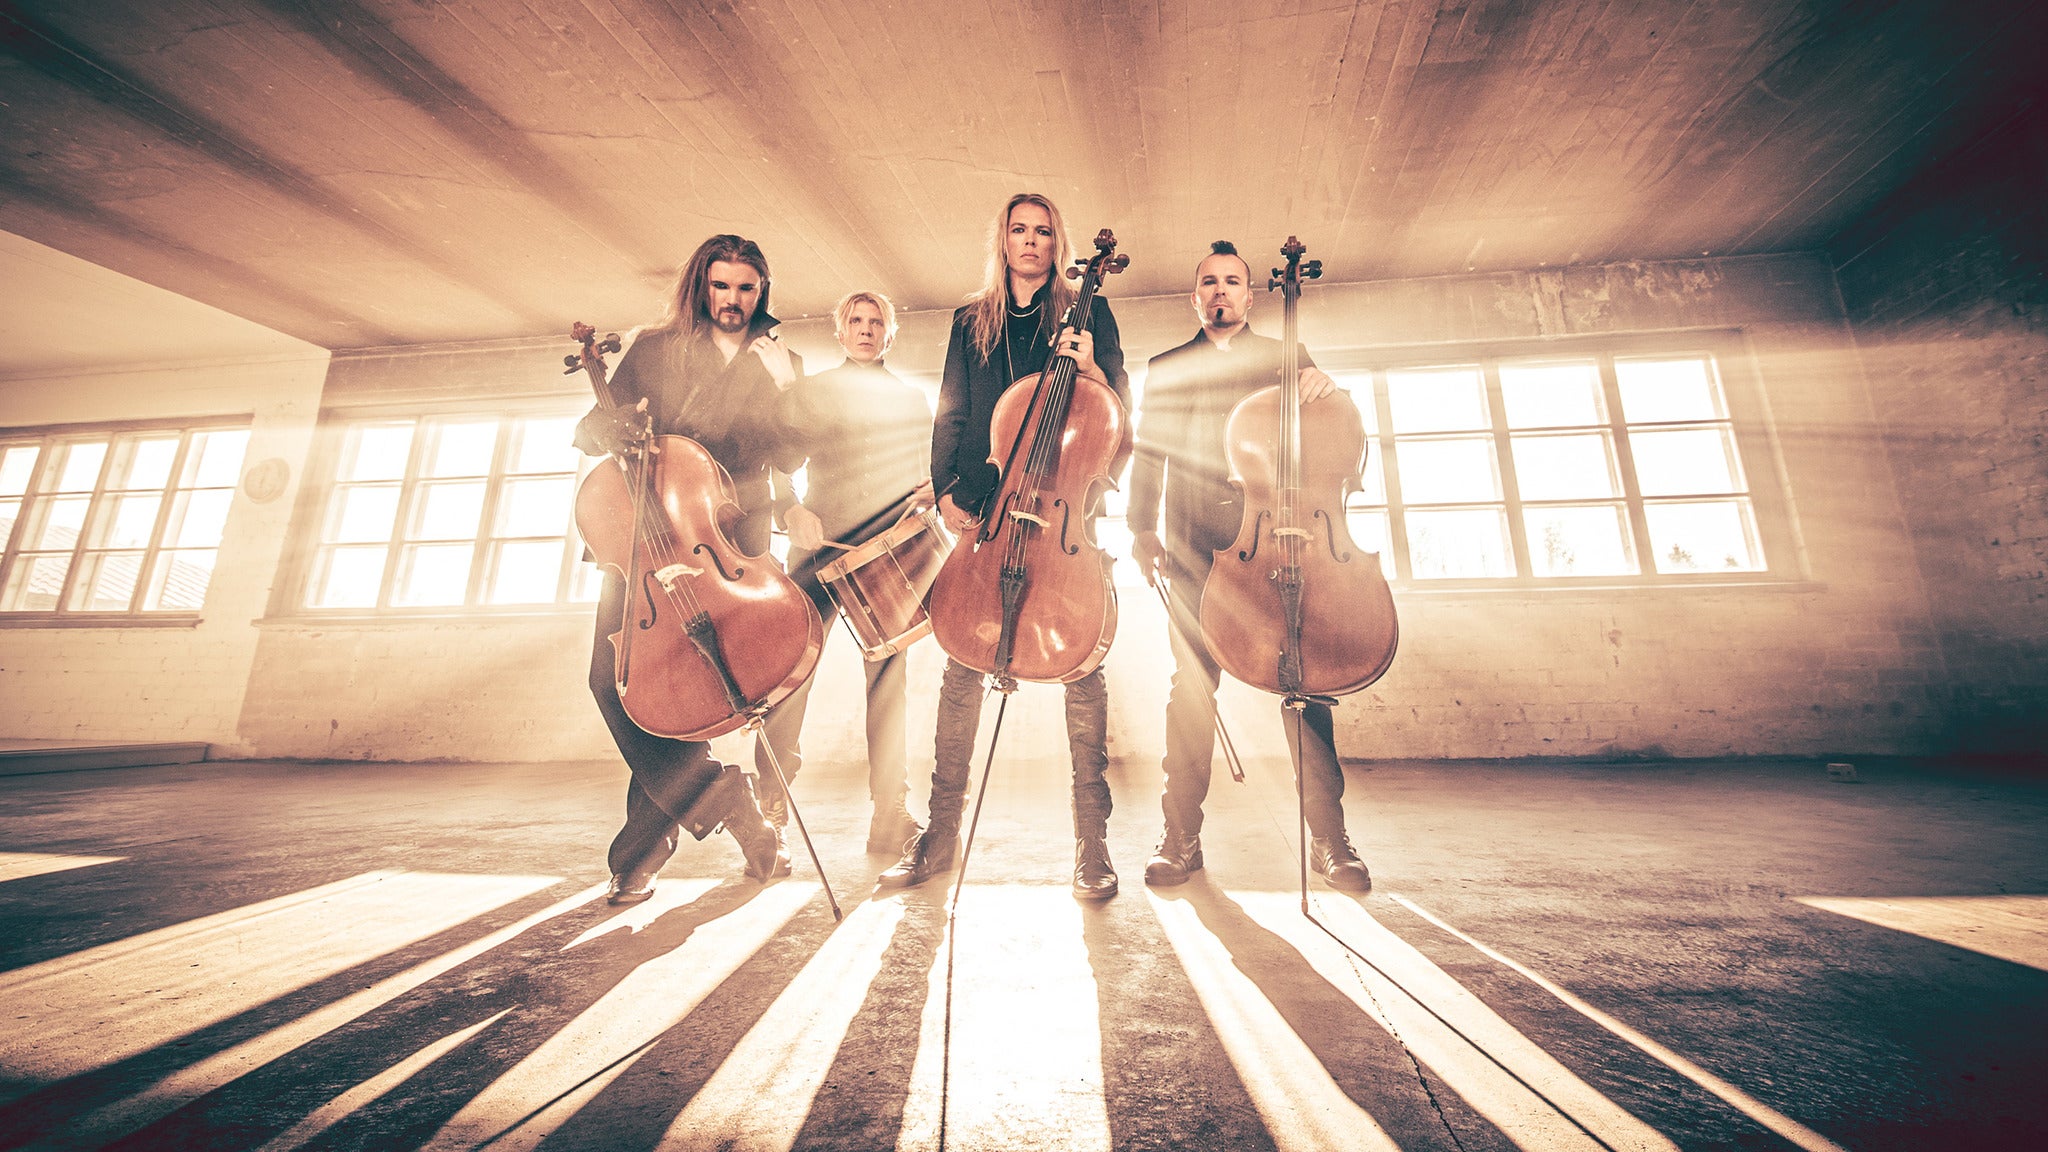 Apocalyptica - Cell-0 Tour at The Observatory